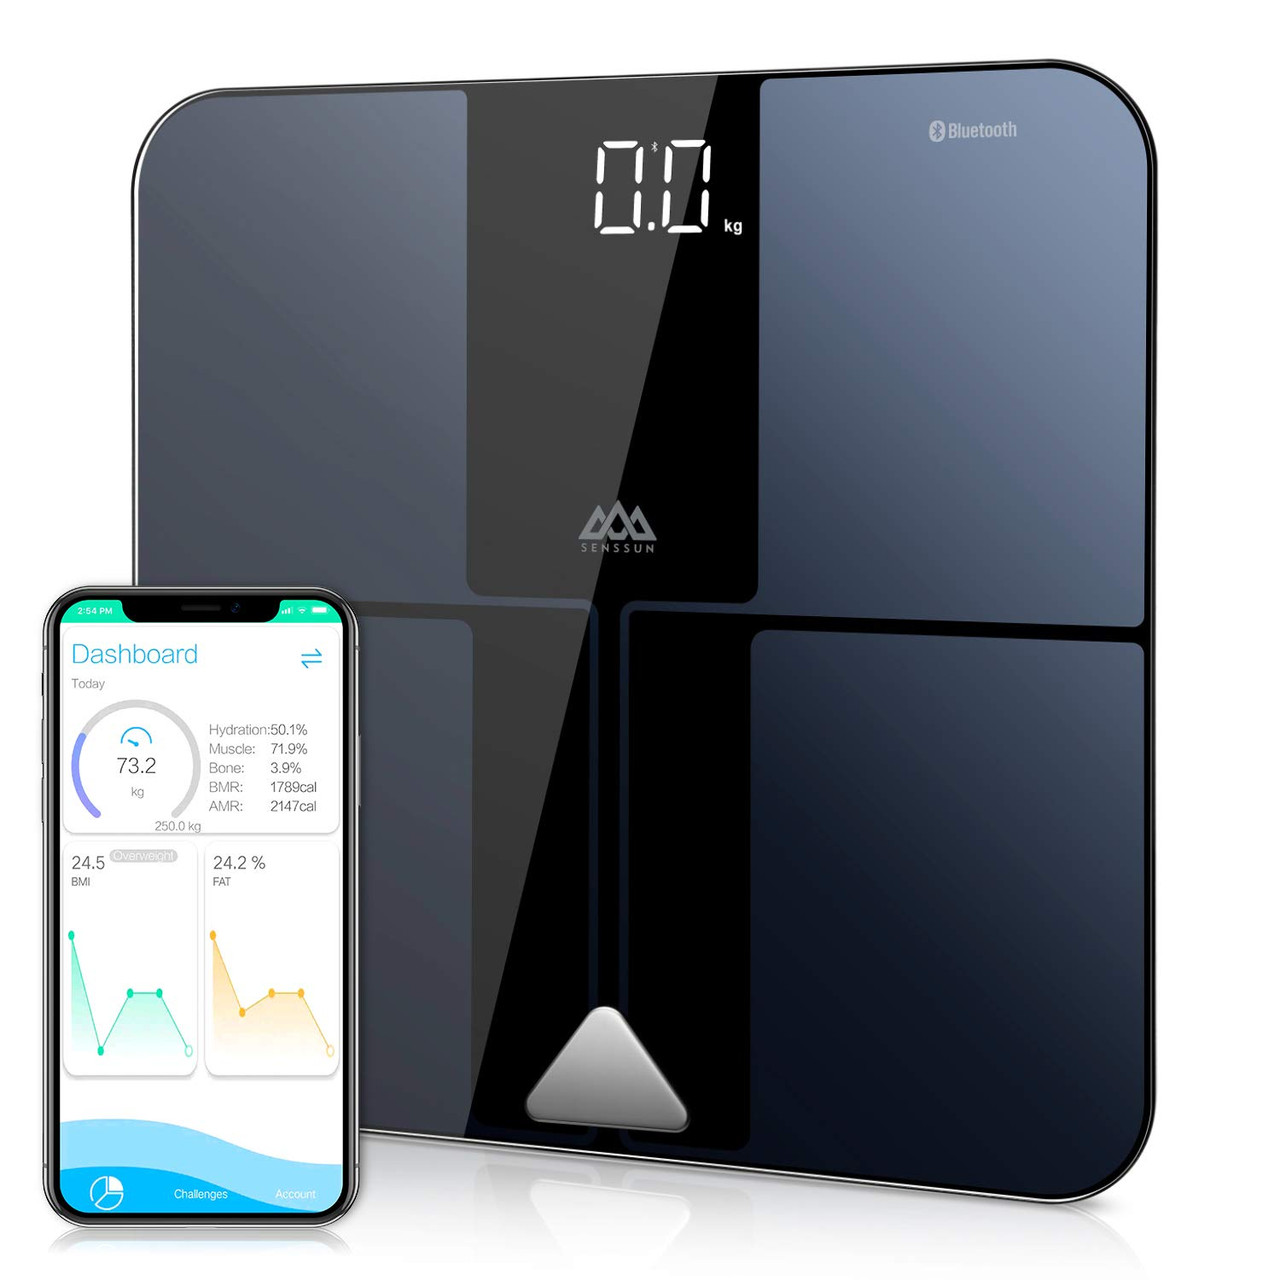 Fit2live Smart Digital Weight Scale Bluetooth Google Play Apple Phone App for  sale online